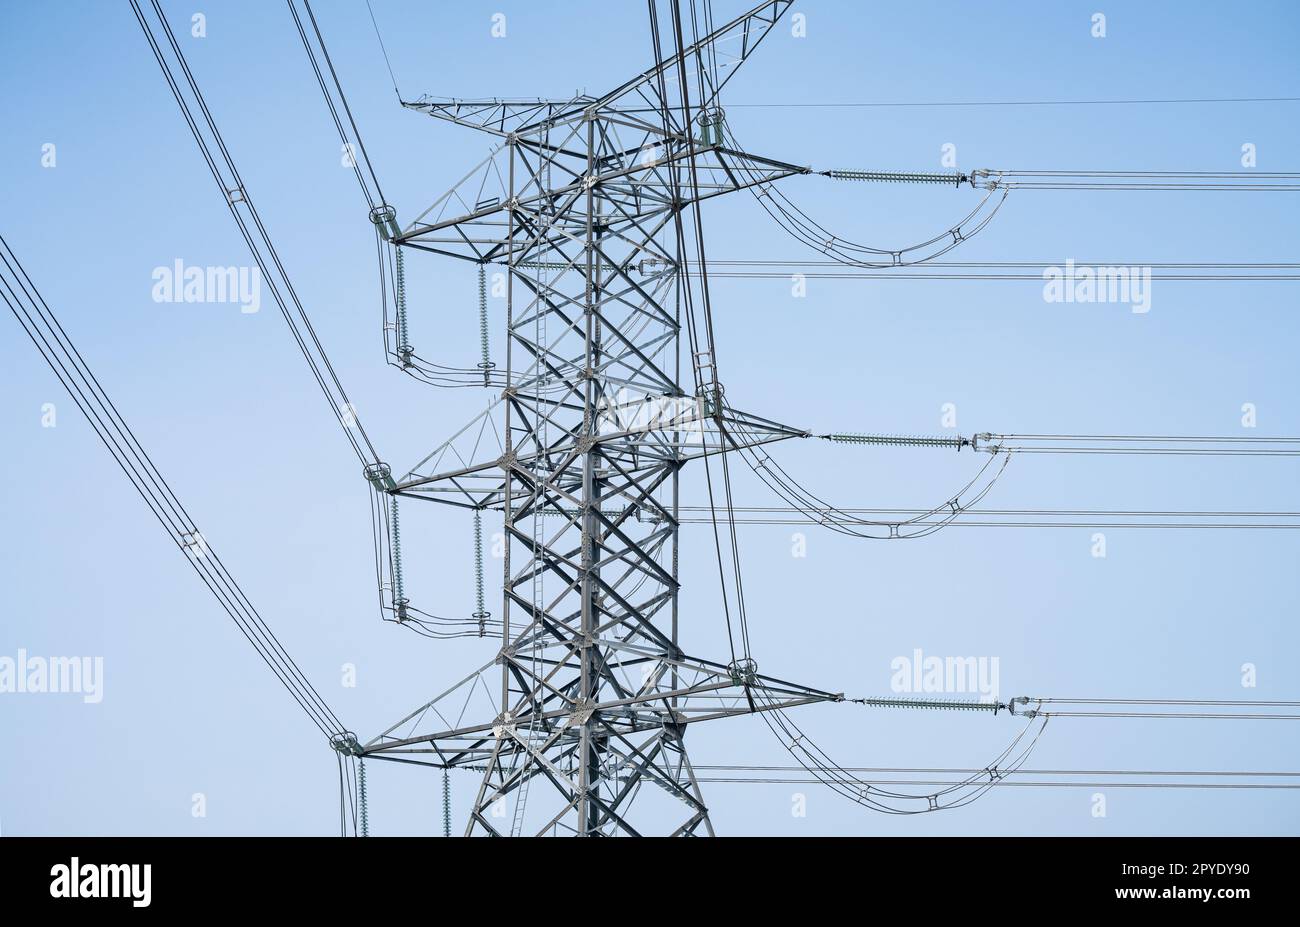 High voltage electric transmission tower. High voltage power lines against the sky. Electricity pylon and electric power transmission lines. High Voltage tower provide power supply. Energy crisis. Stock Photo